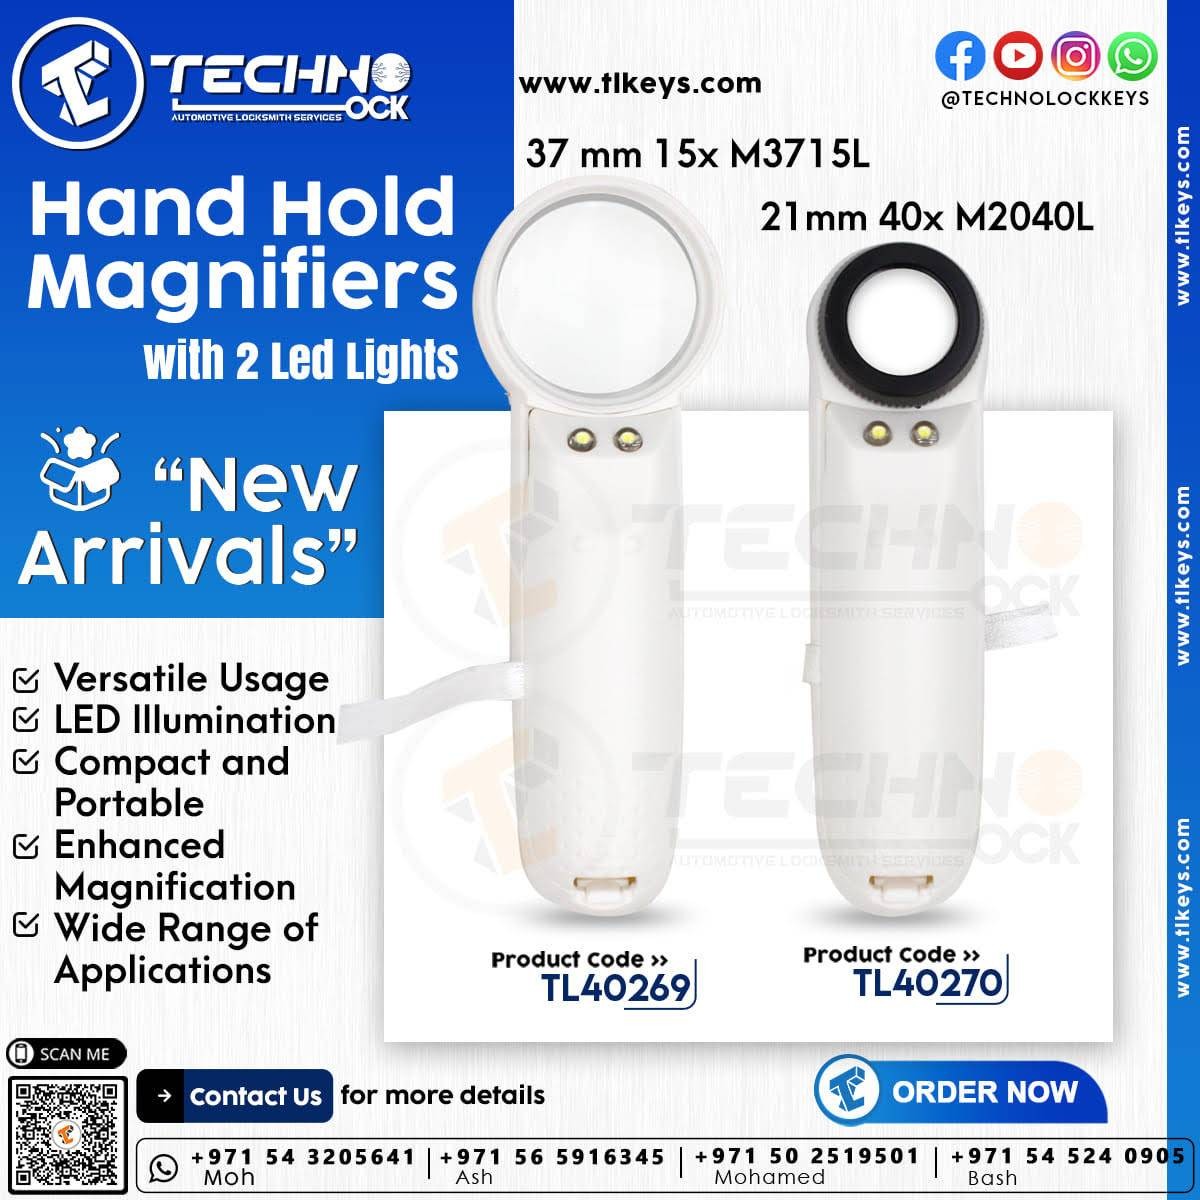 Hand Hold Magnifier 37 mm 15x M3715L with 2 Led Light